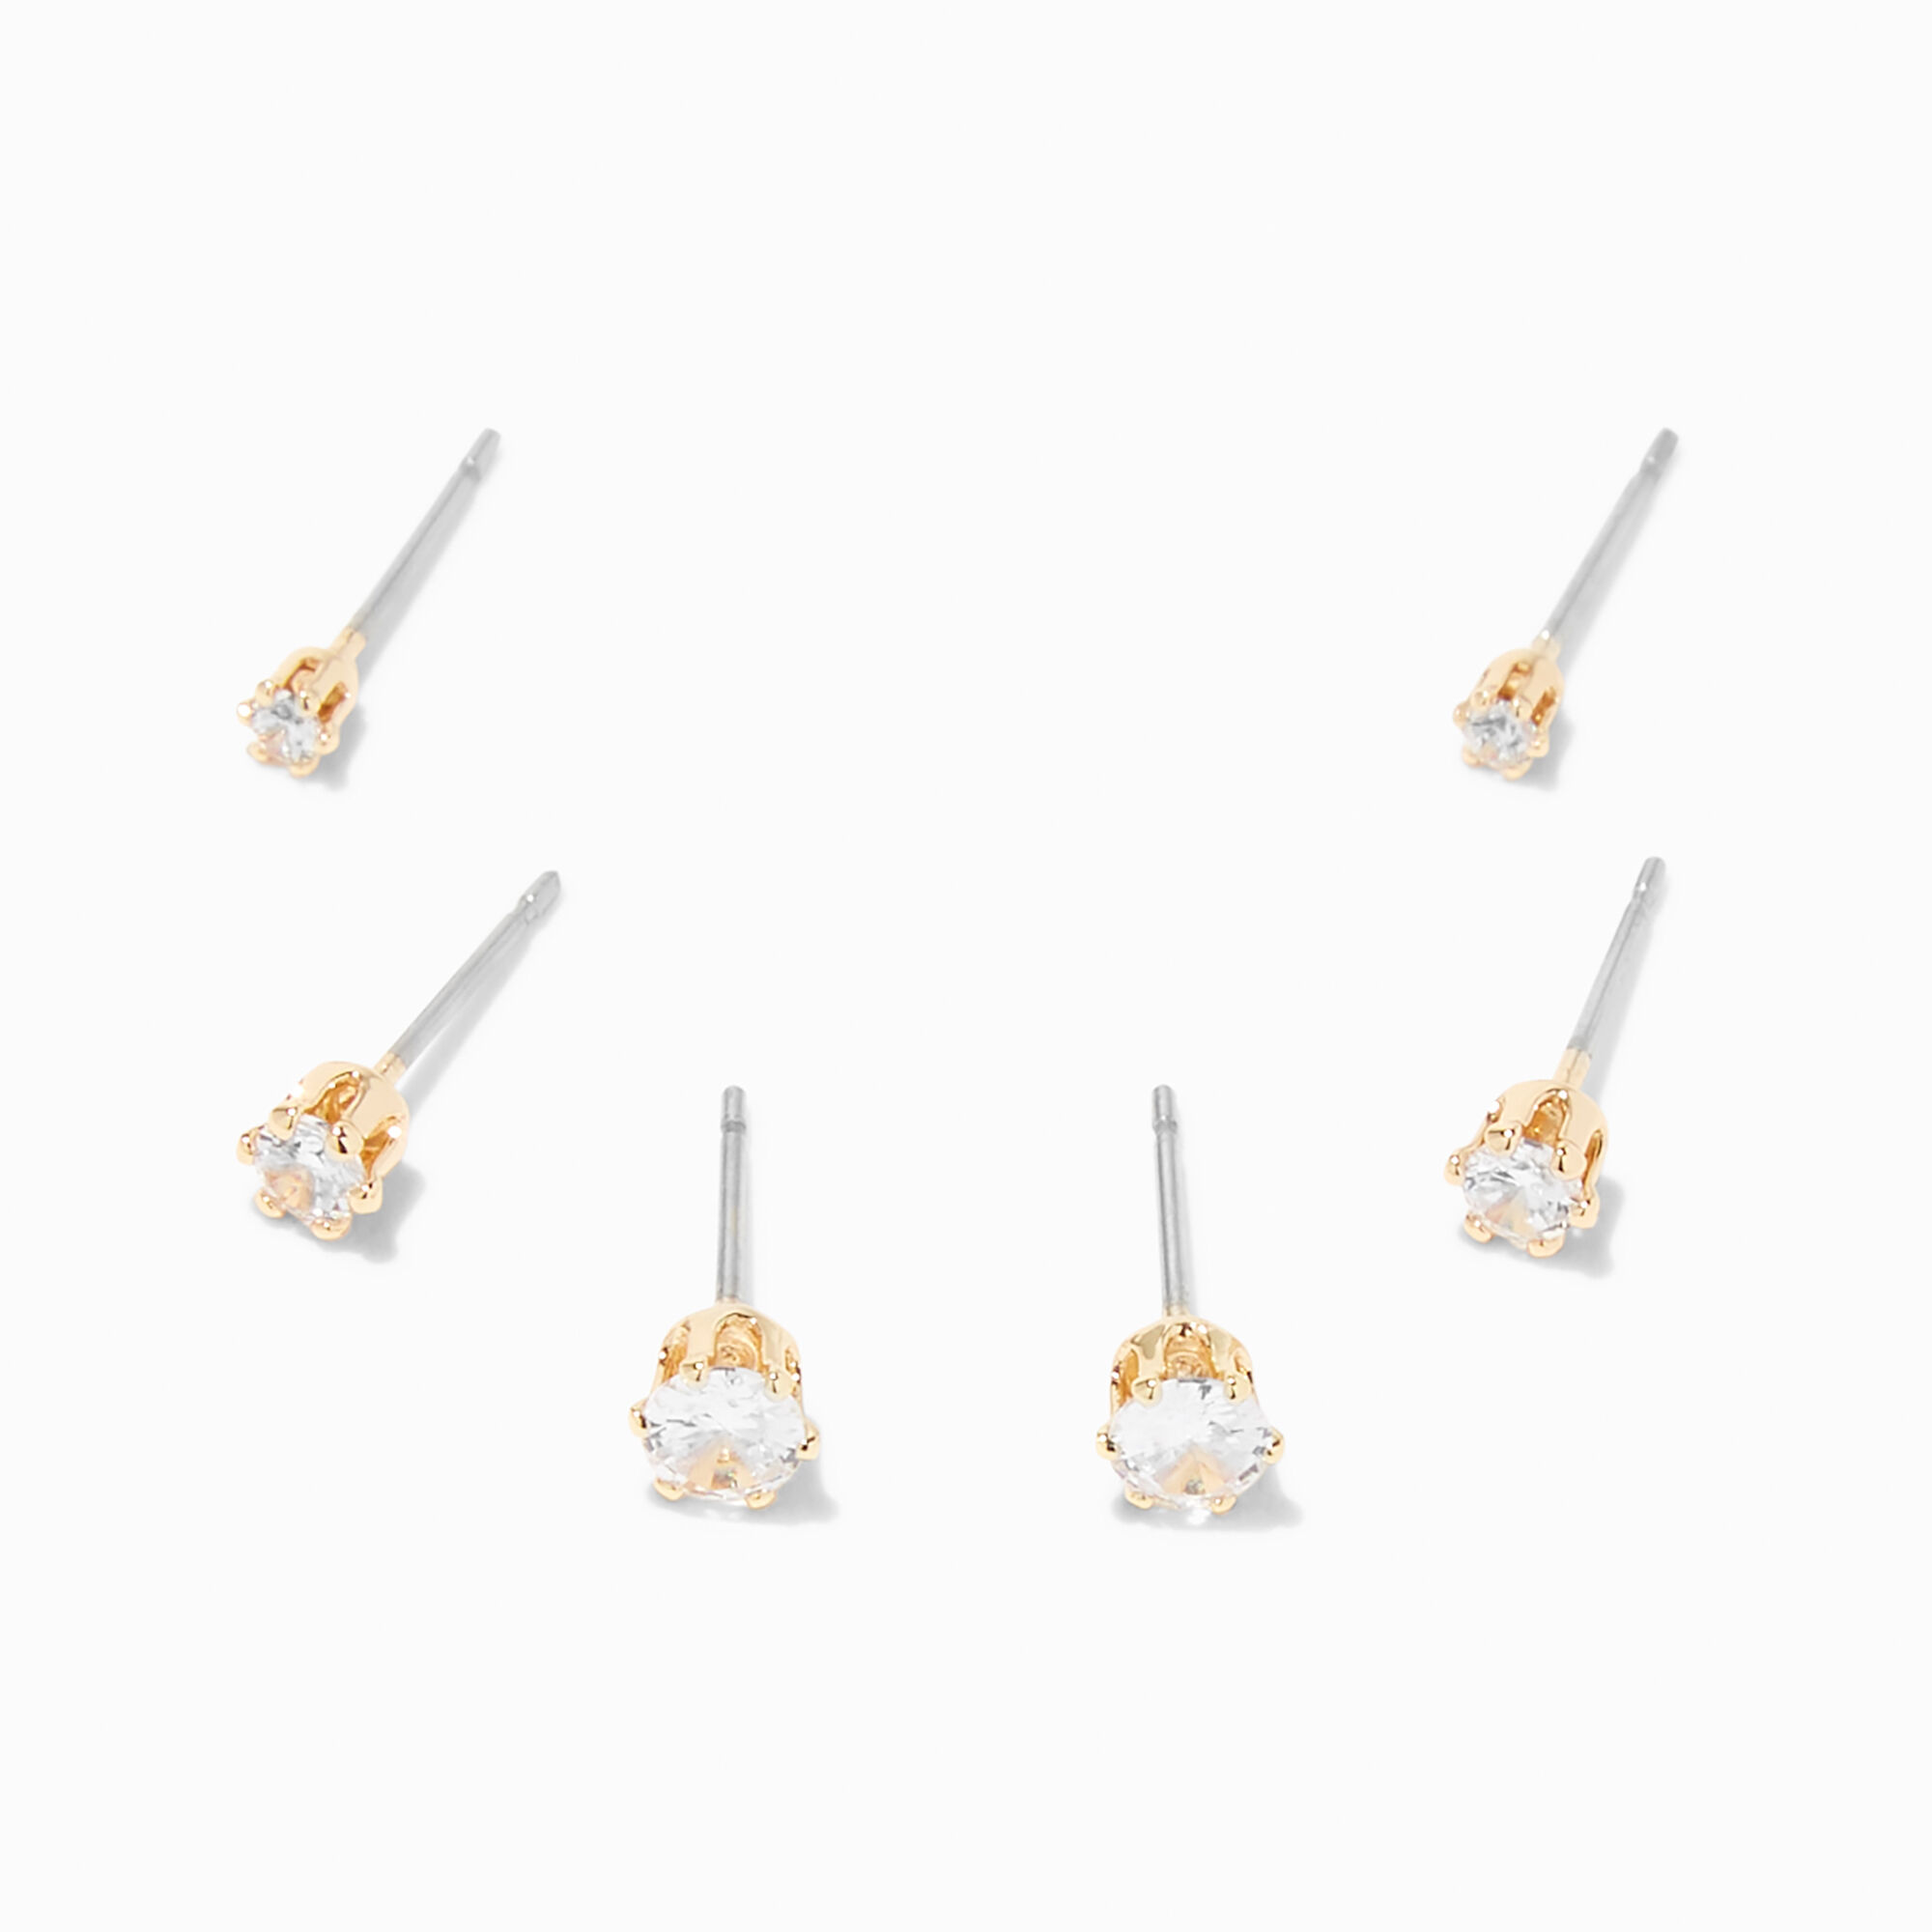 View Claires Tone Cubic Zirconia 2MM 3MM 4MM Round Stud Earrings 3 Pack Gold information